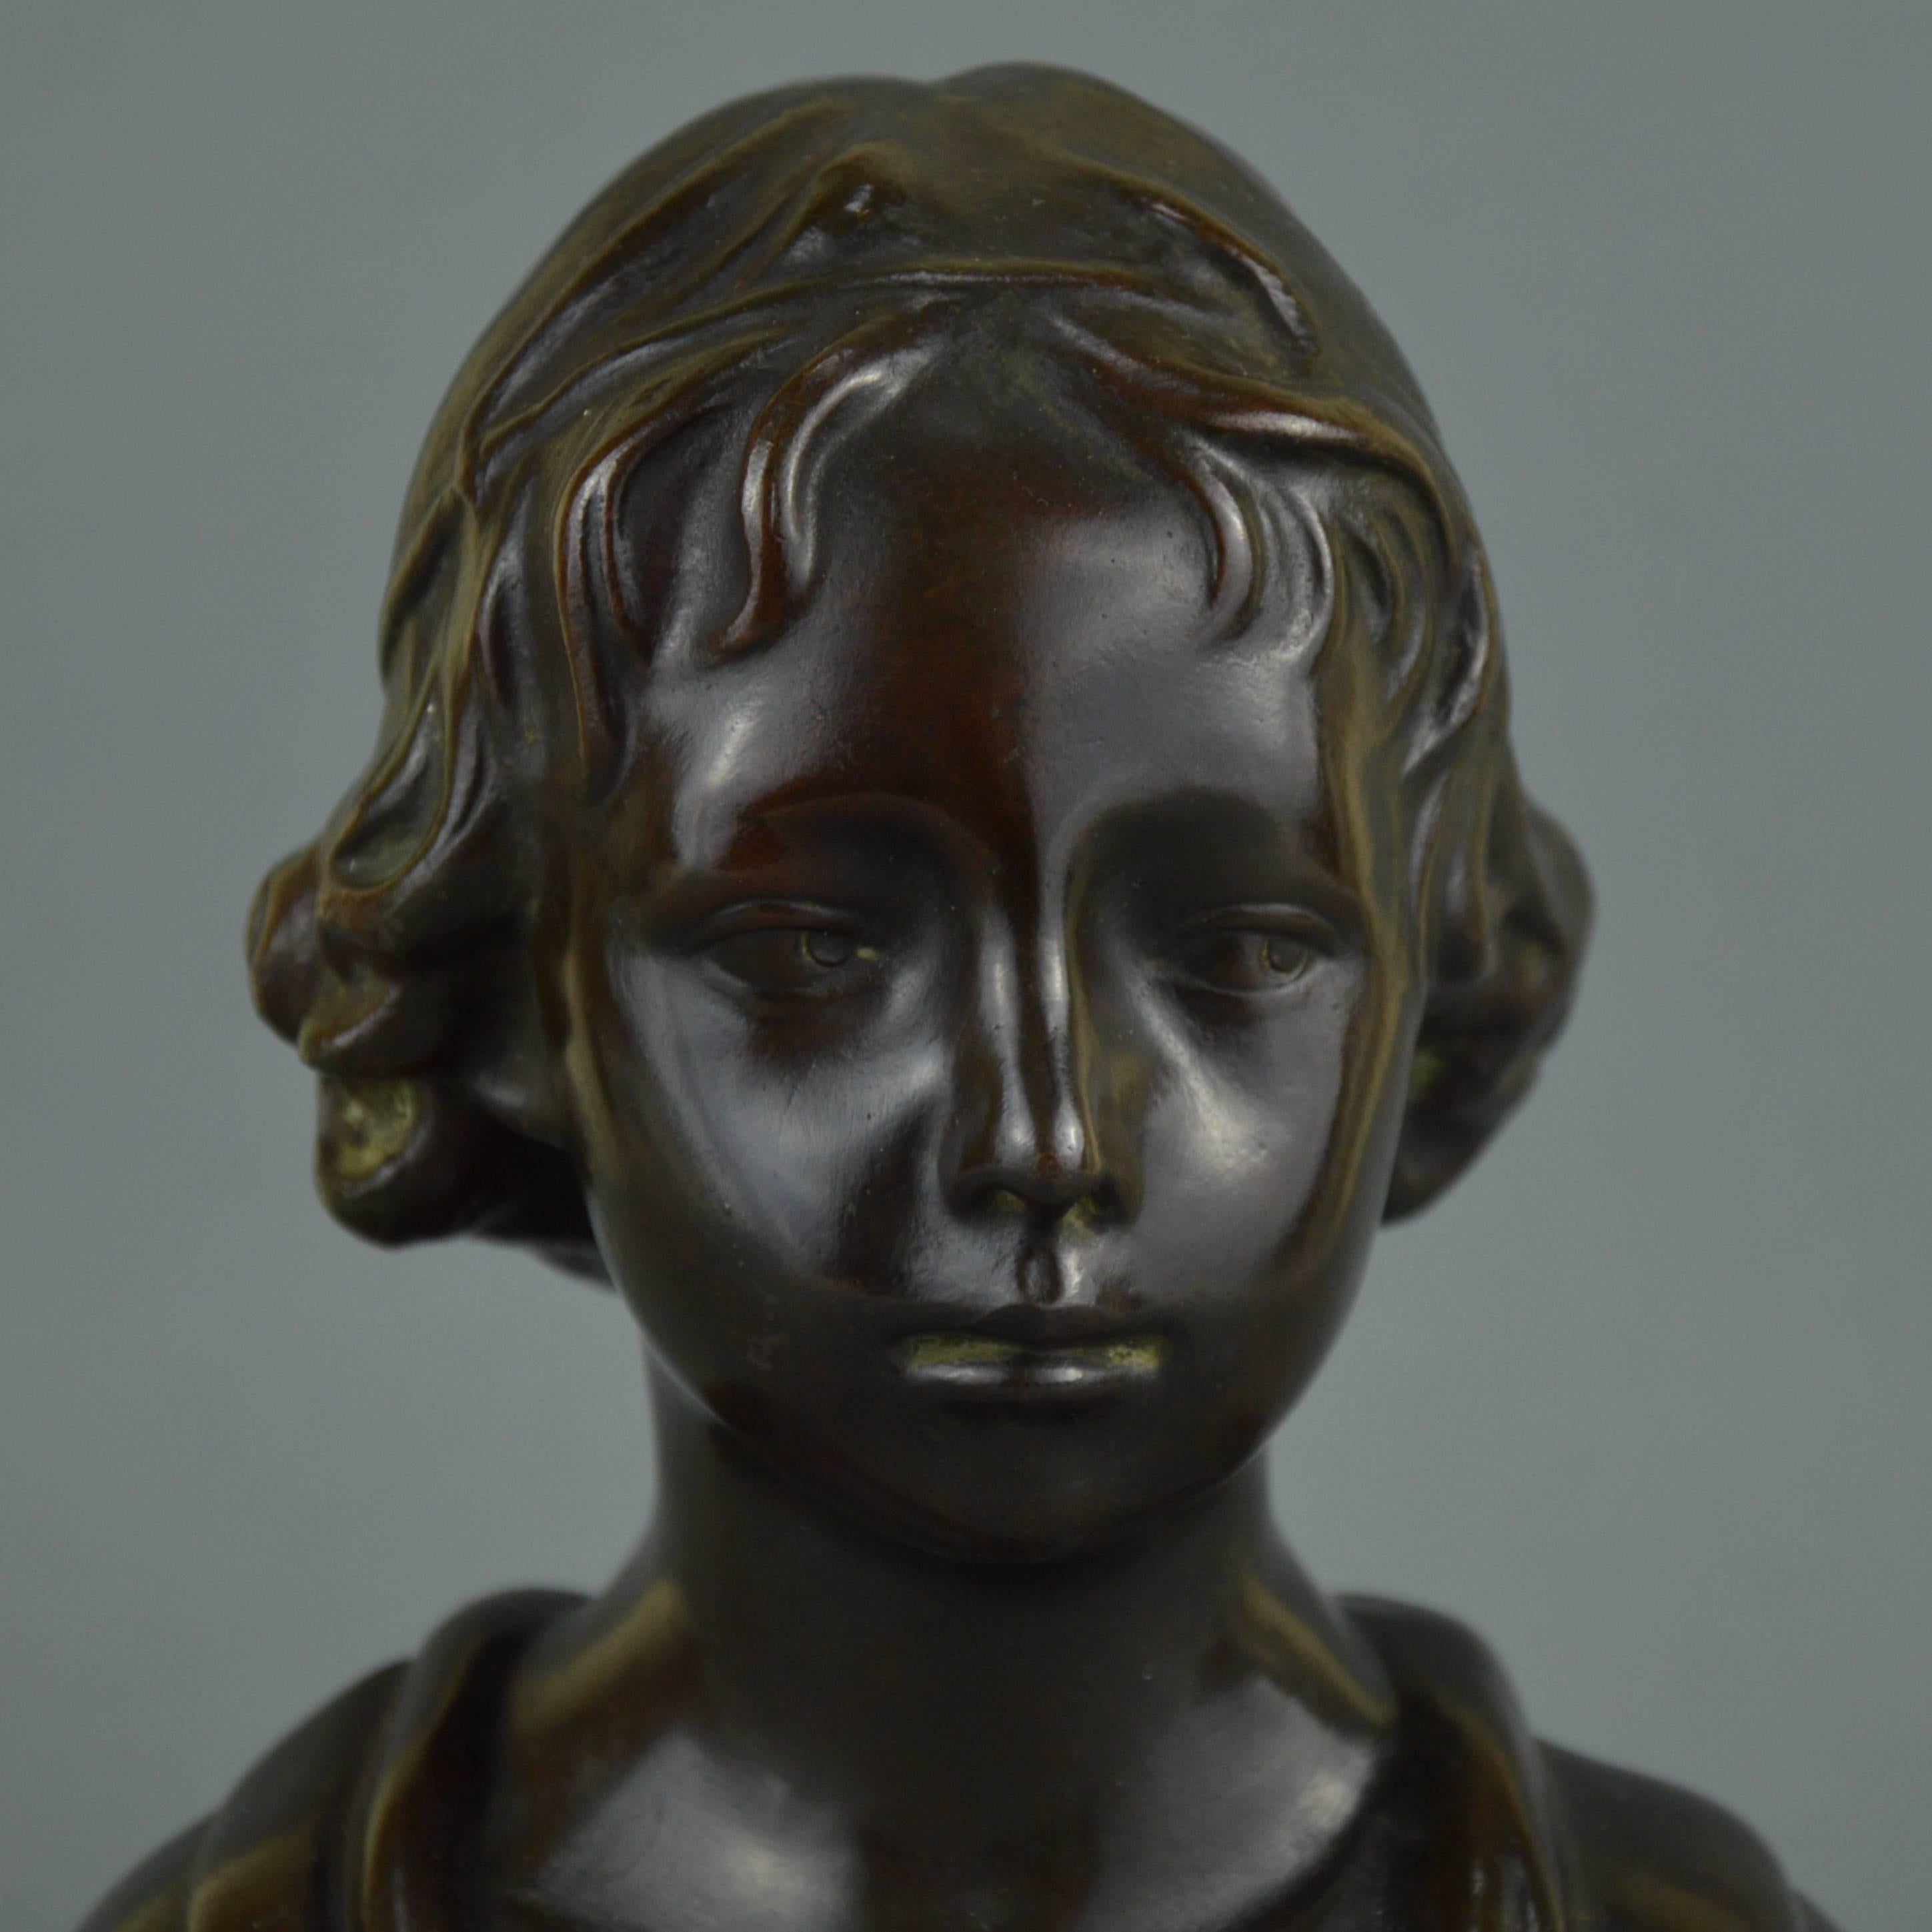 Bronze sculpture bust of a young girl. Belgian school.
A. Daver foundry, Brussels.
Late 19th-early 20th century.
Measures: Height 20 cm.